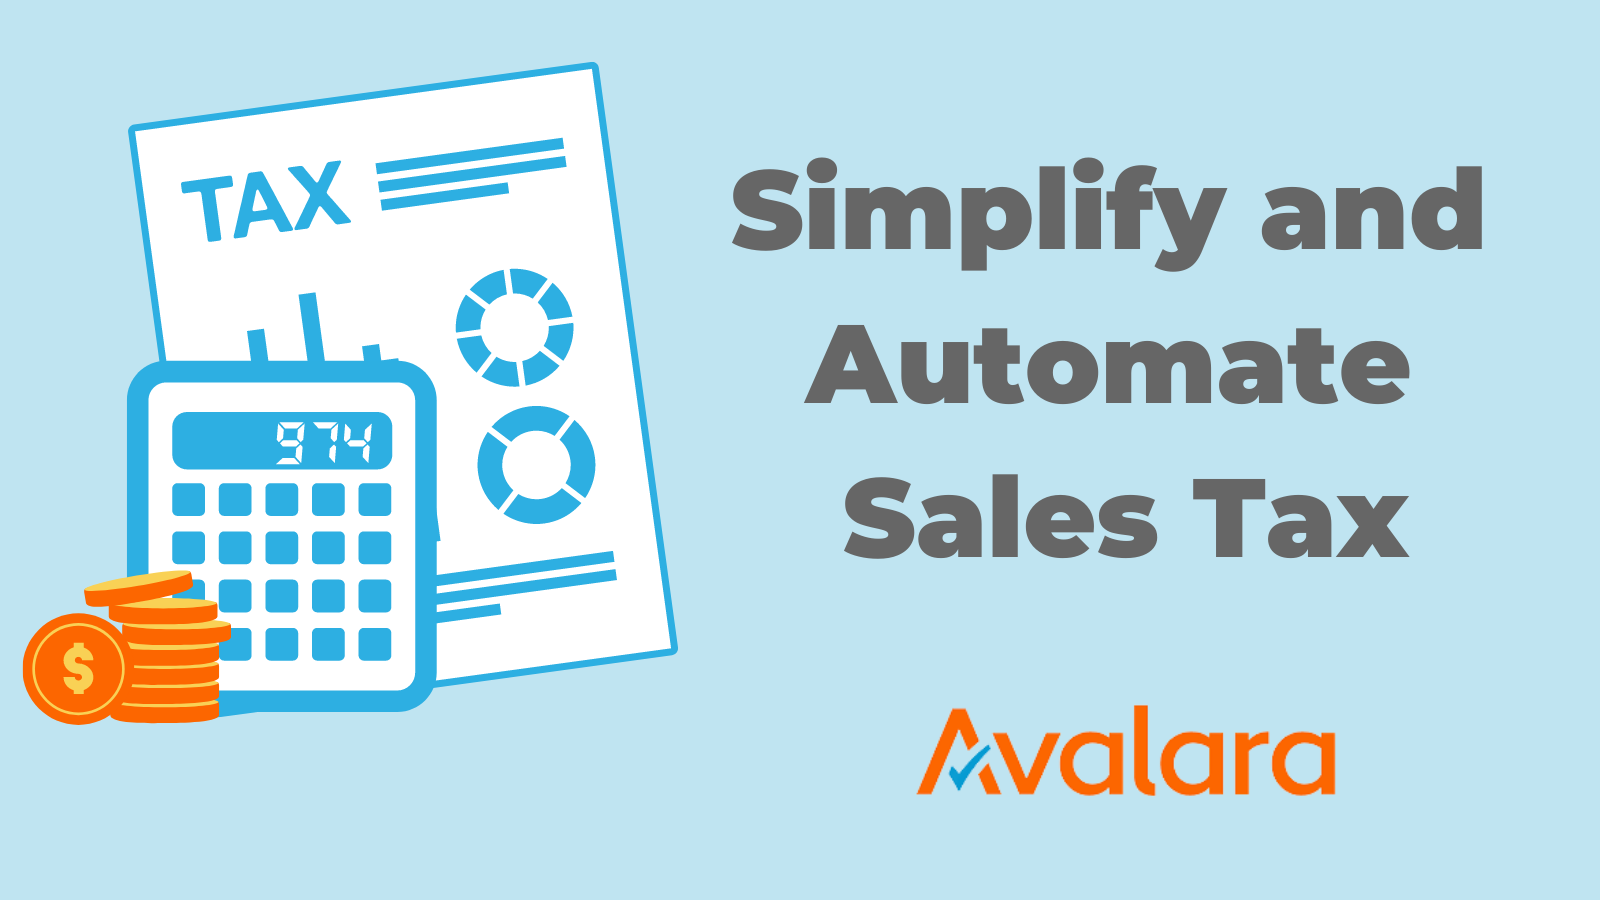 Simplify and Automate Sales Tax